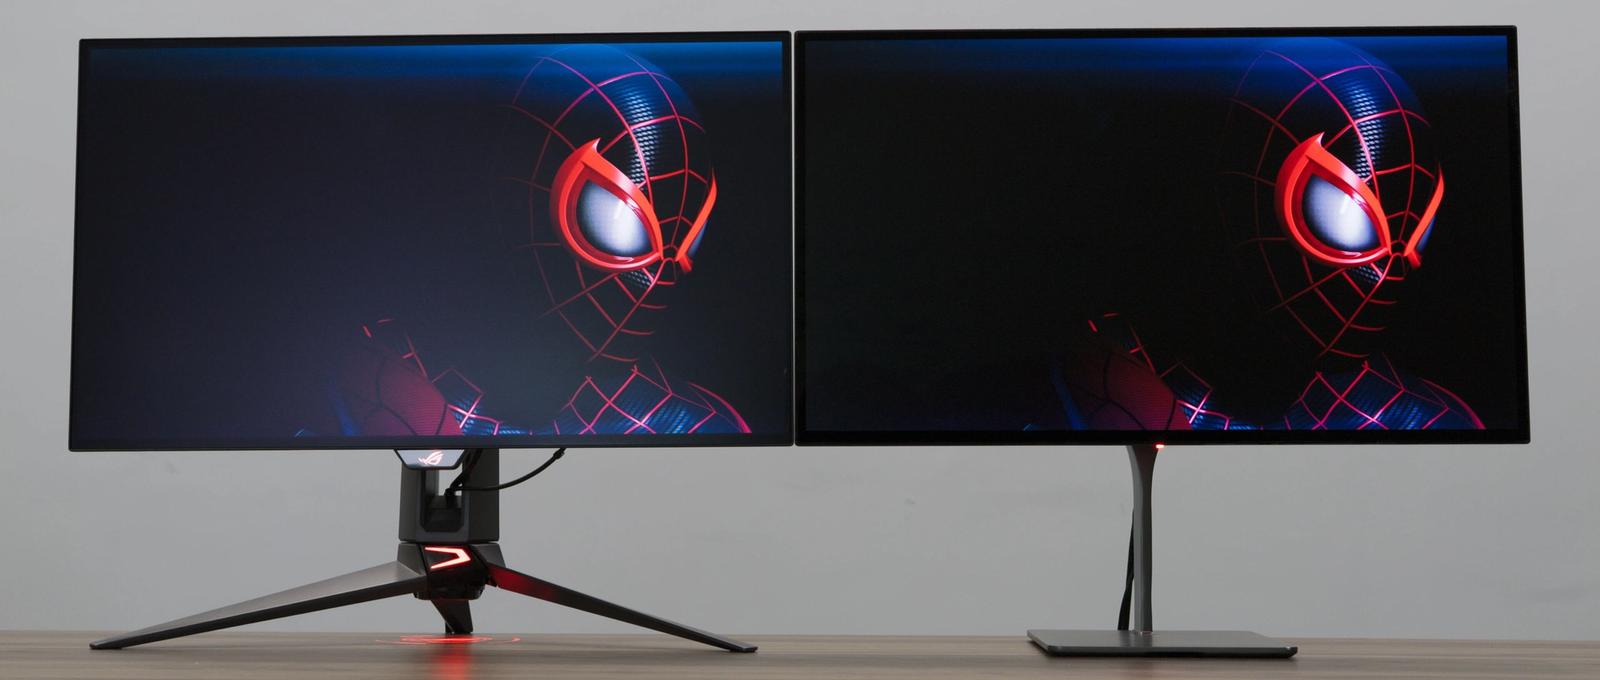 A Dough Spectrum Black 32-inch 4K 240Hz OLED gaming monior next to an Asus display of the same size, comparing the shininess of screens